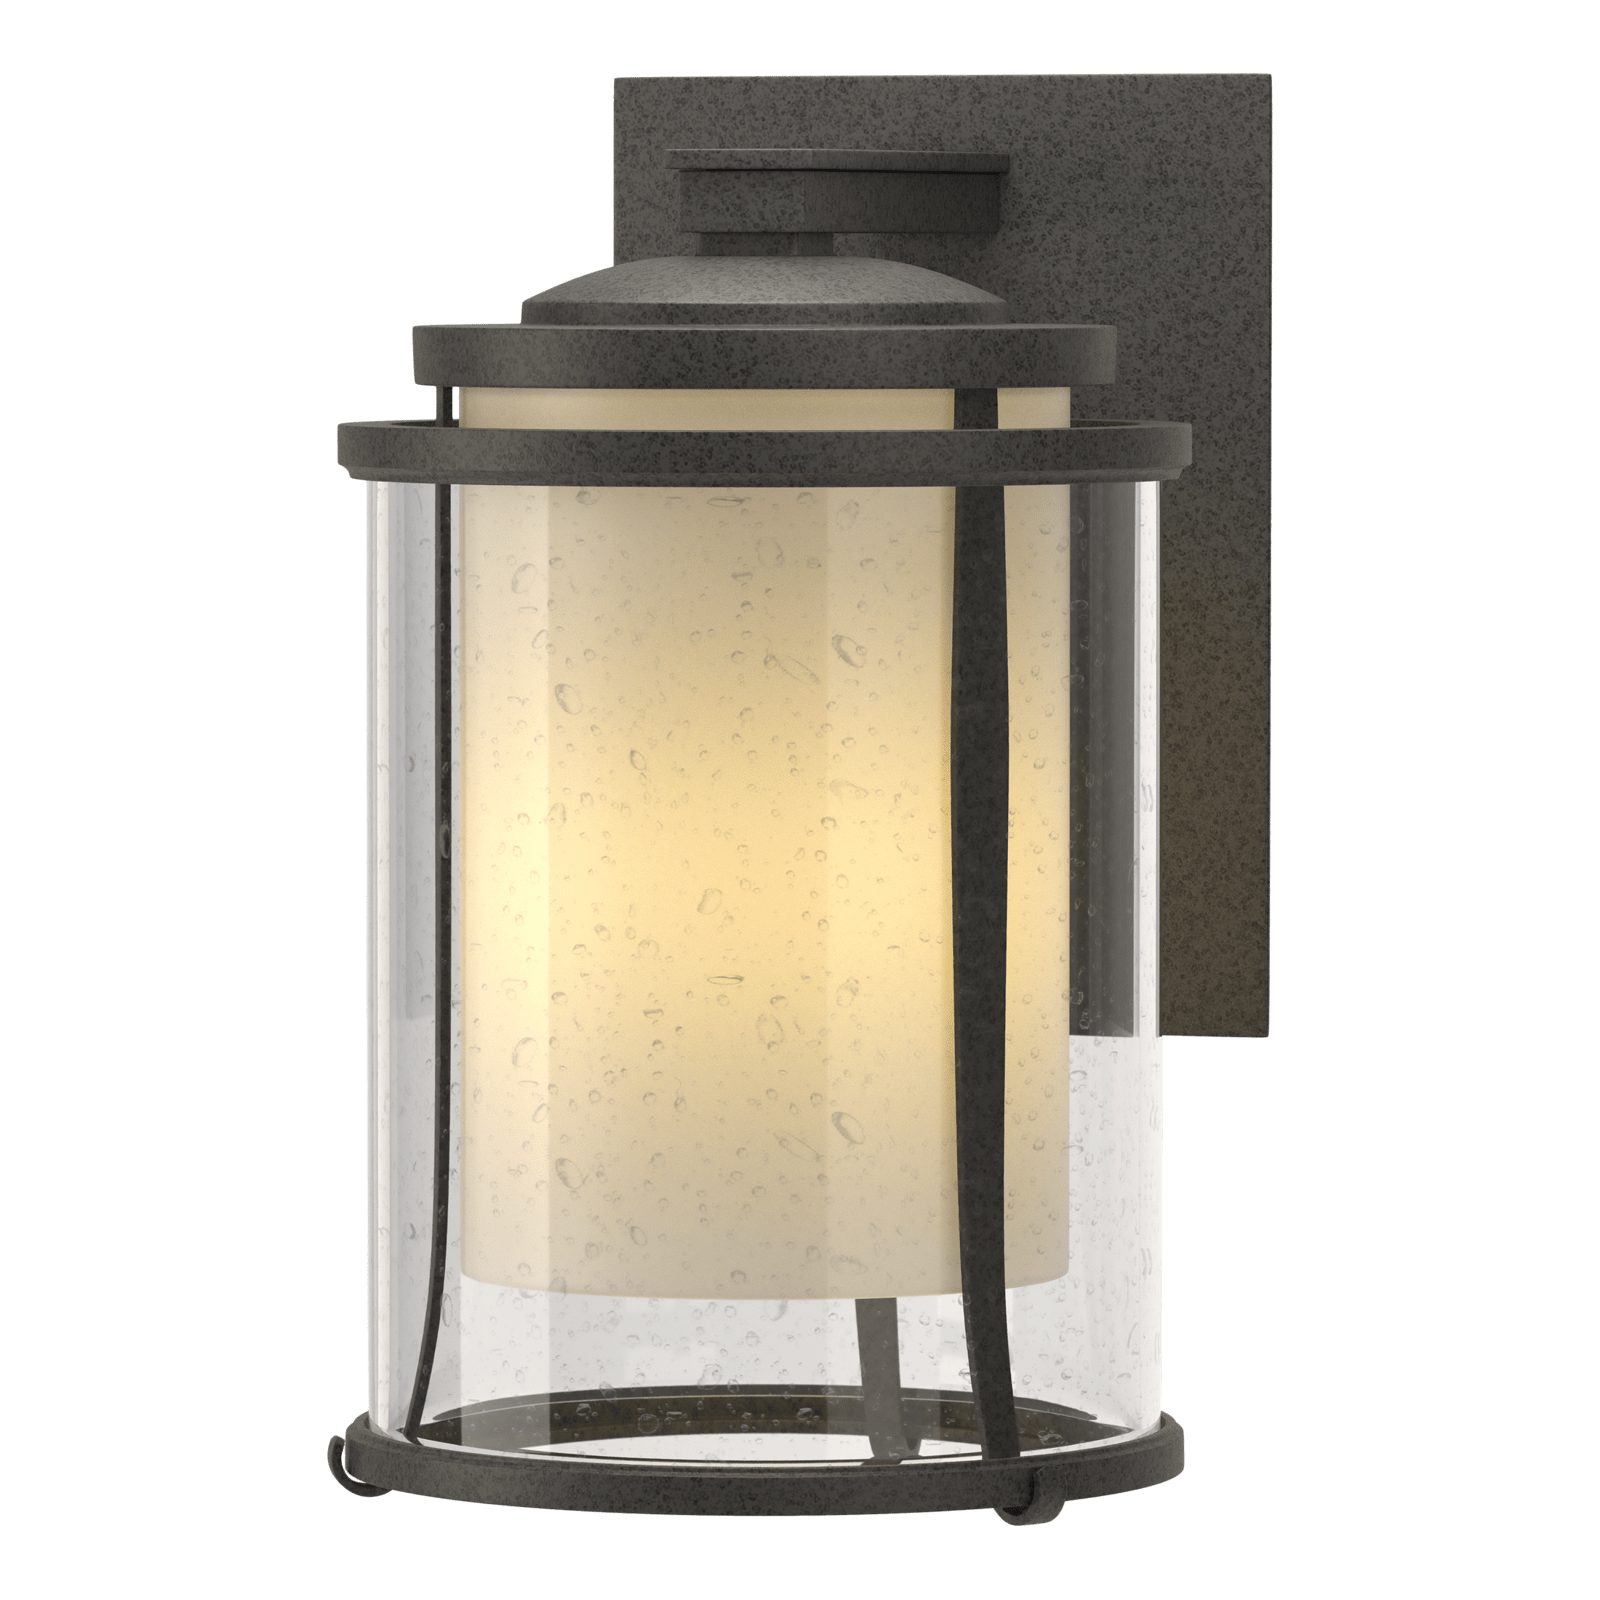 Hubbardton Forge Meridian Large Outdoor Sconce